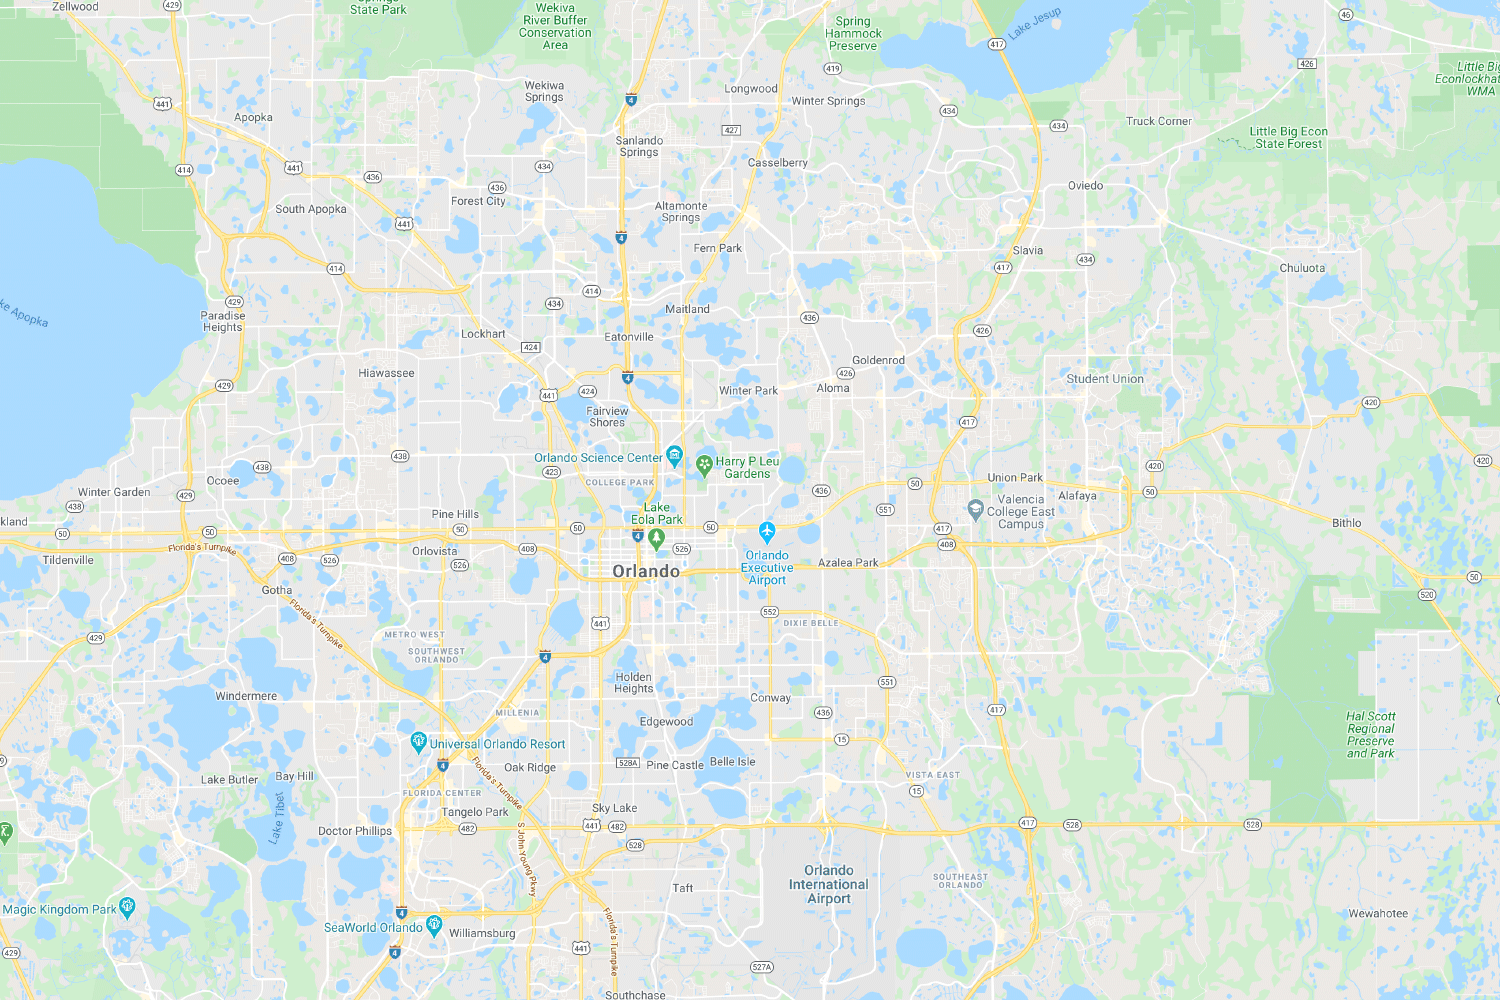 Map of Central Florida location